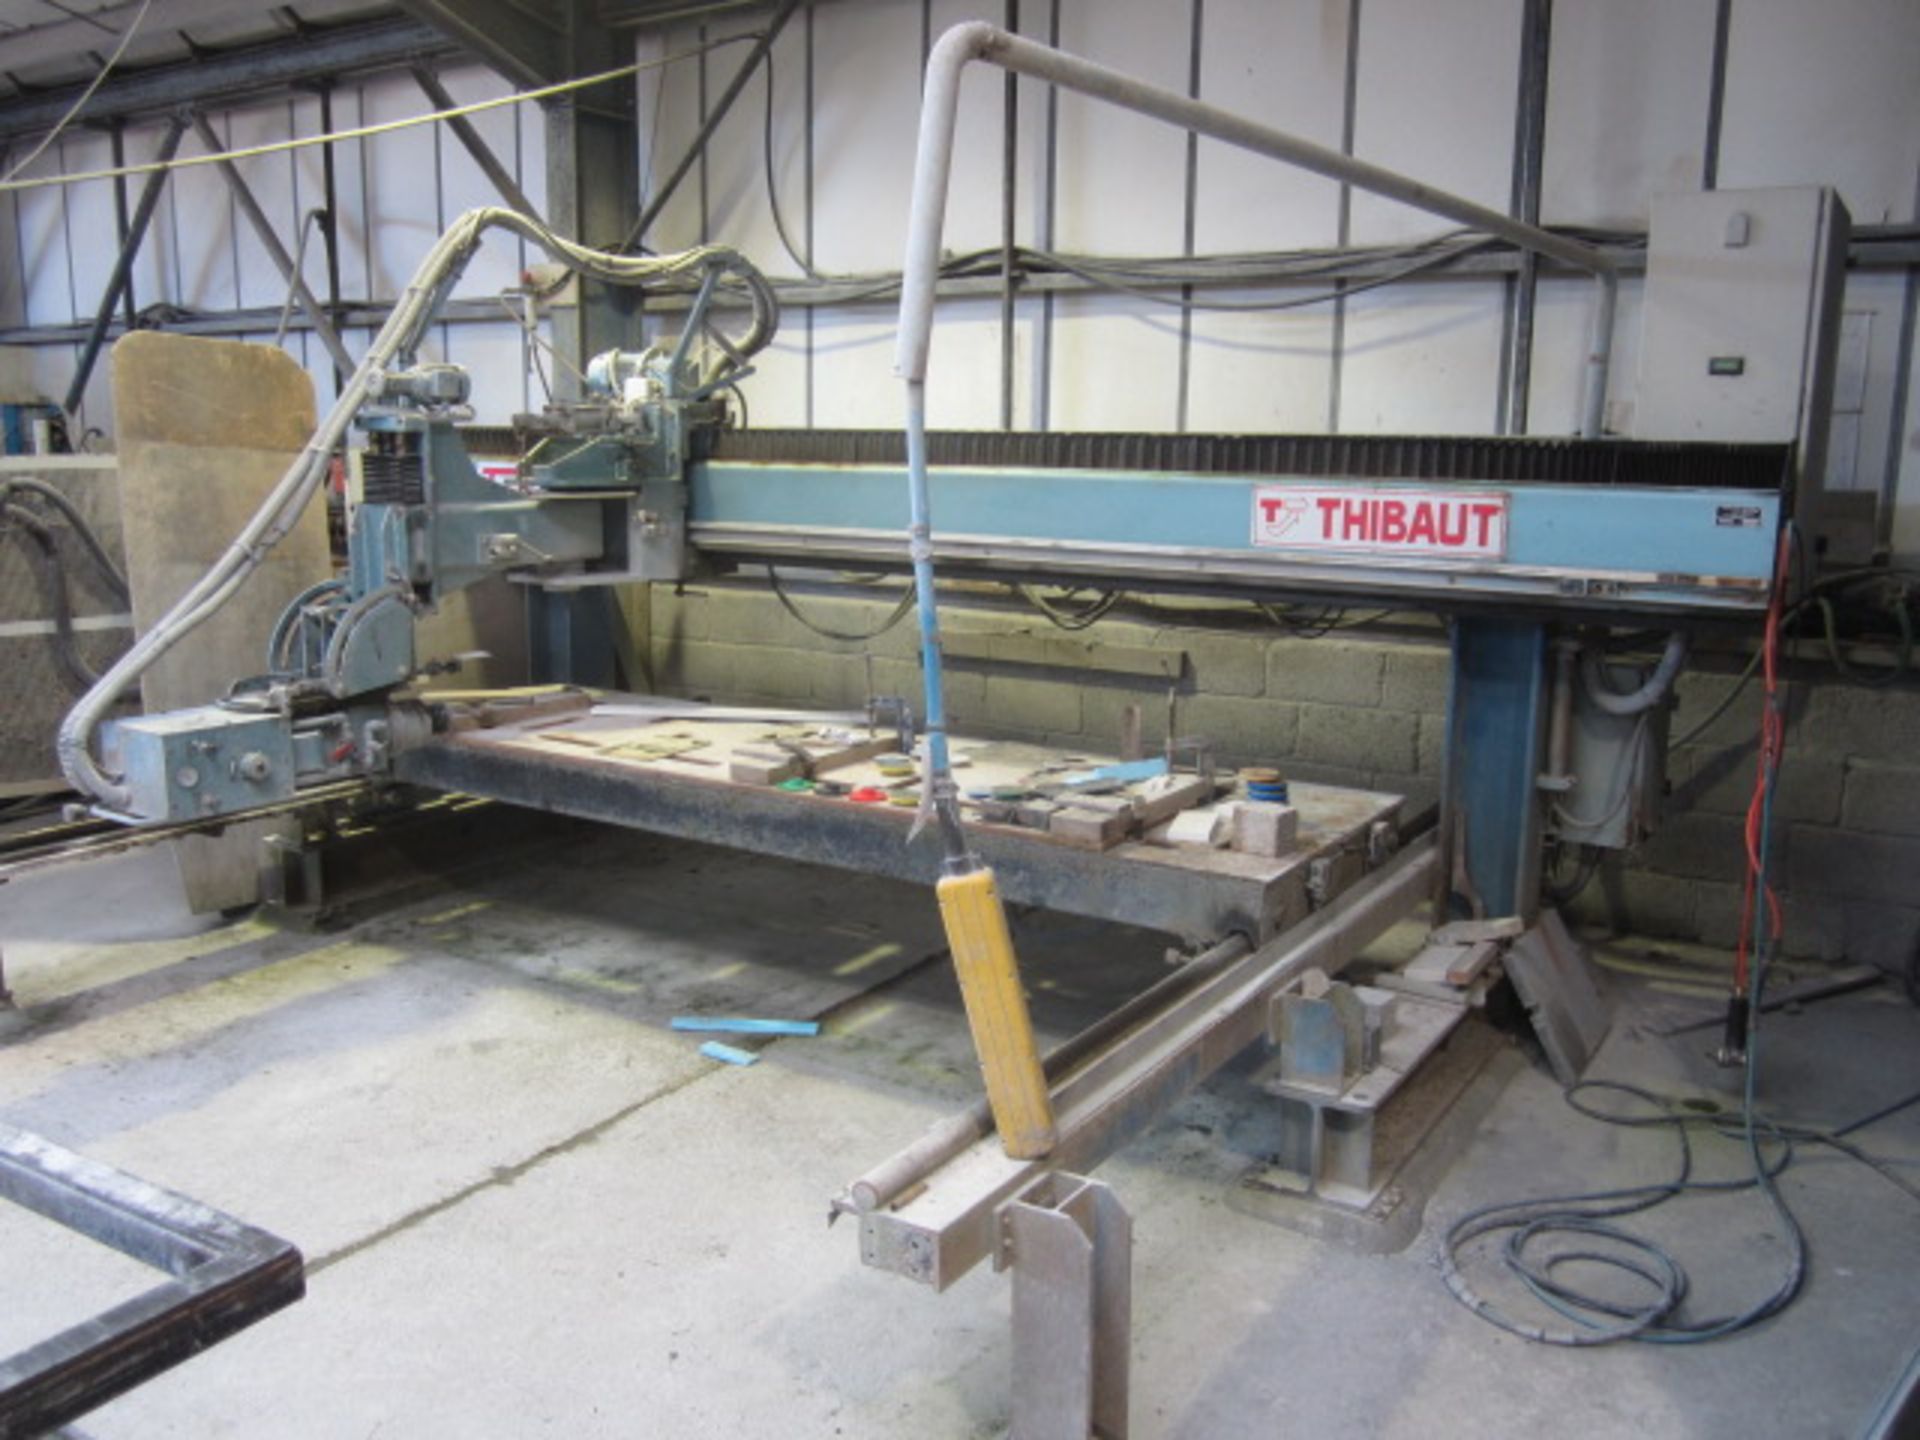 Thibaut T50 3 axis bridge type works centre, s/n: 4, rolling work table, approx. size 3.3m x 1m, 90°